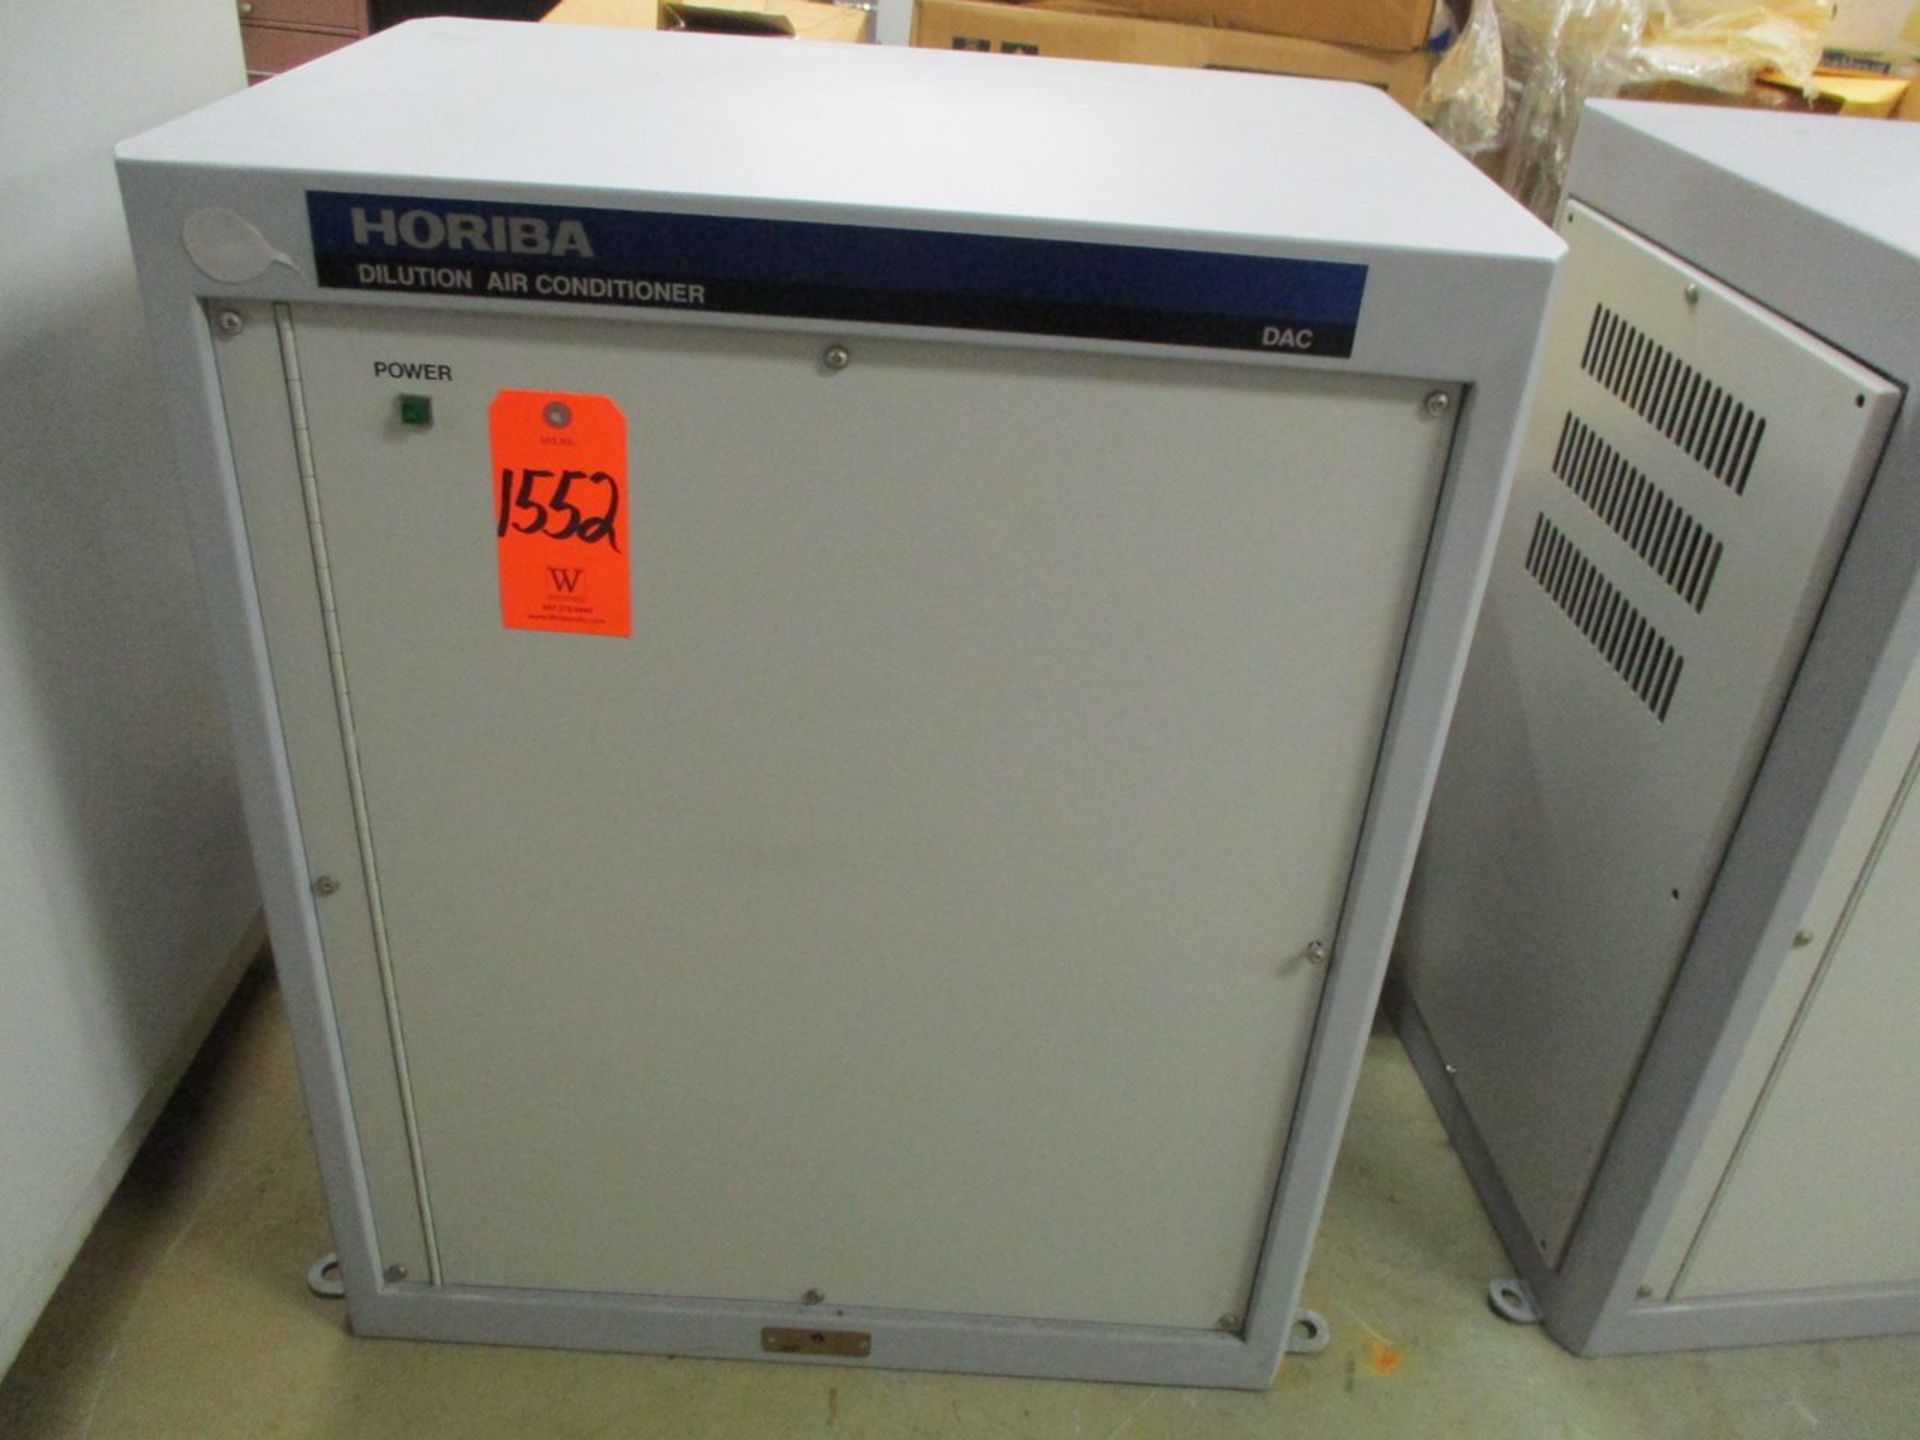 Horiba DAC Dilution Air Conditioner, S/N 6007215 (Basement, Building 10, Area 7)